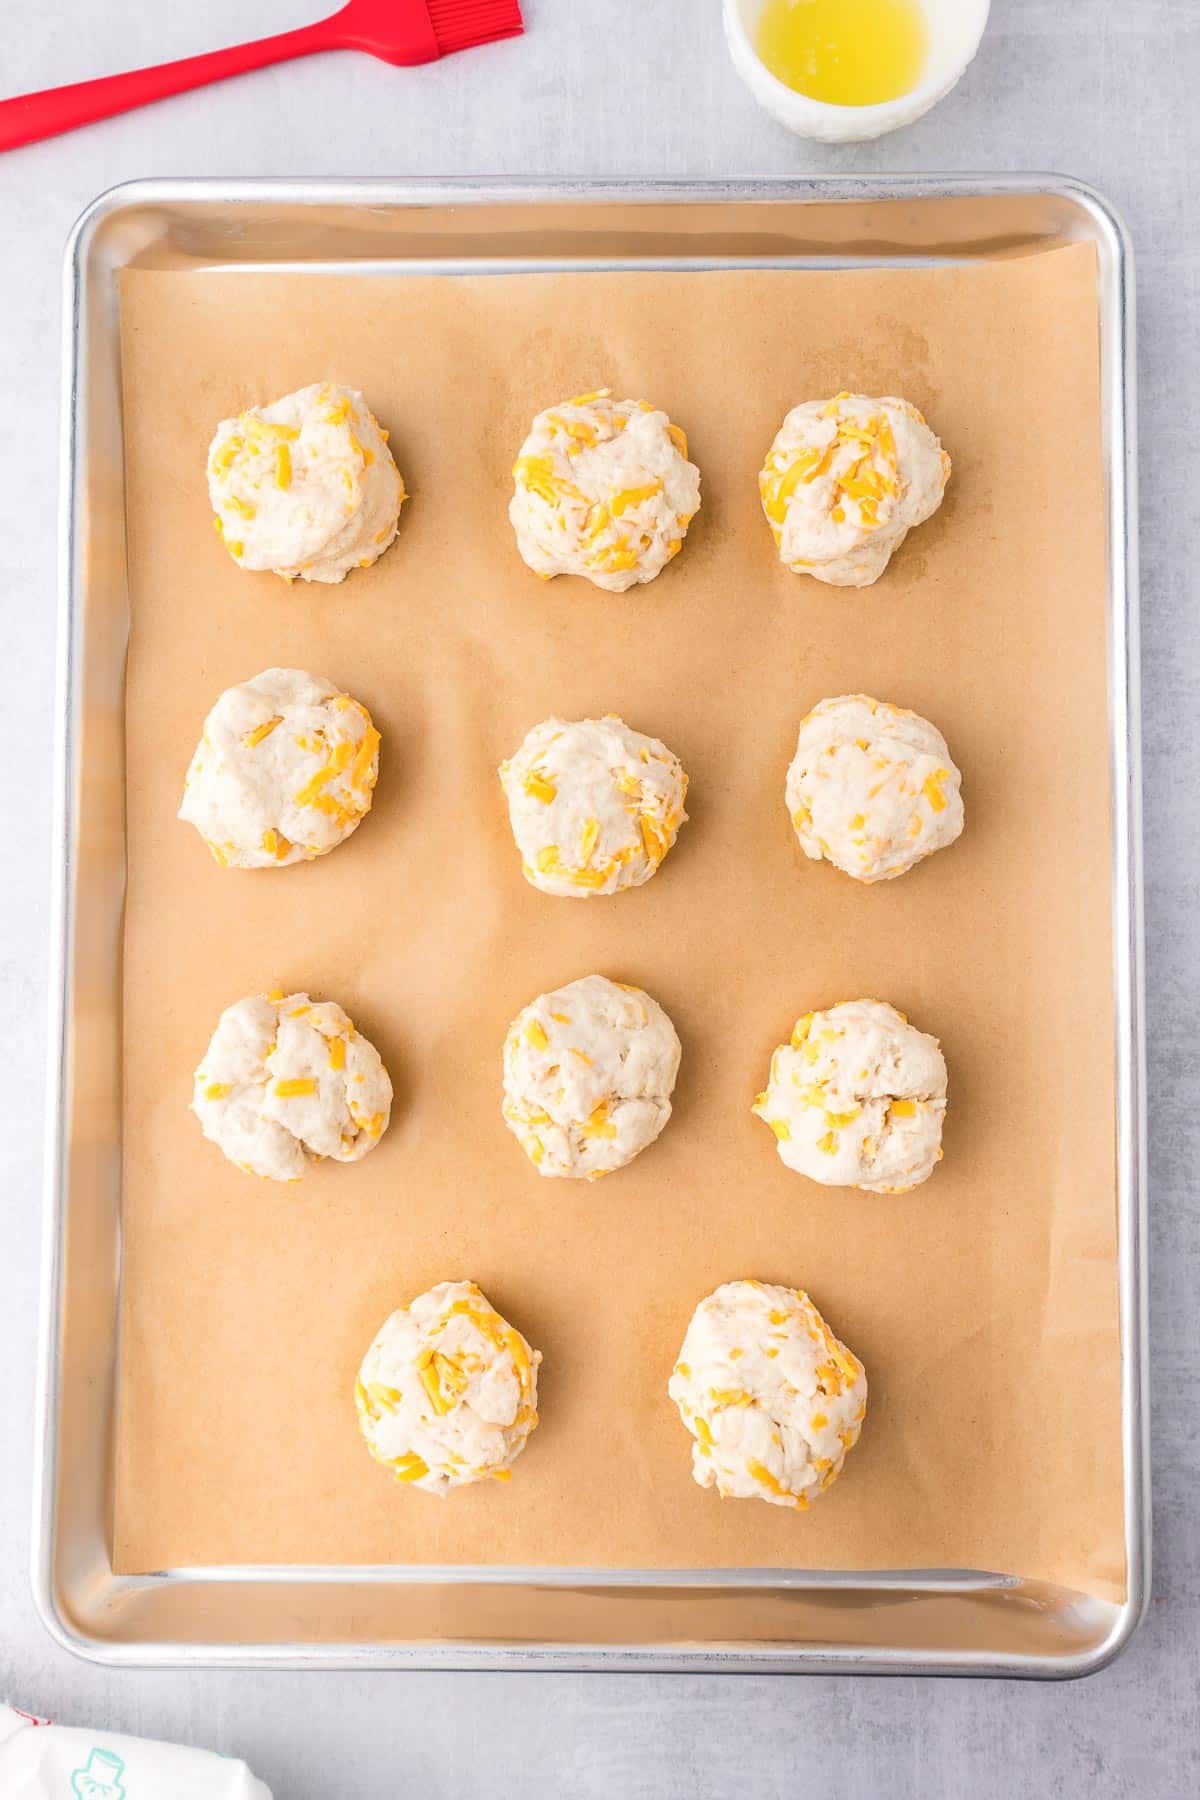 A baking sheet with 12 unbaked garlic cheese biscuits on parchment paper. A small bowl of melted butter and a red pastry brush are in the top left corner.